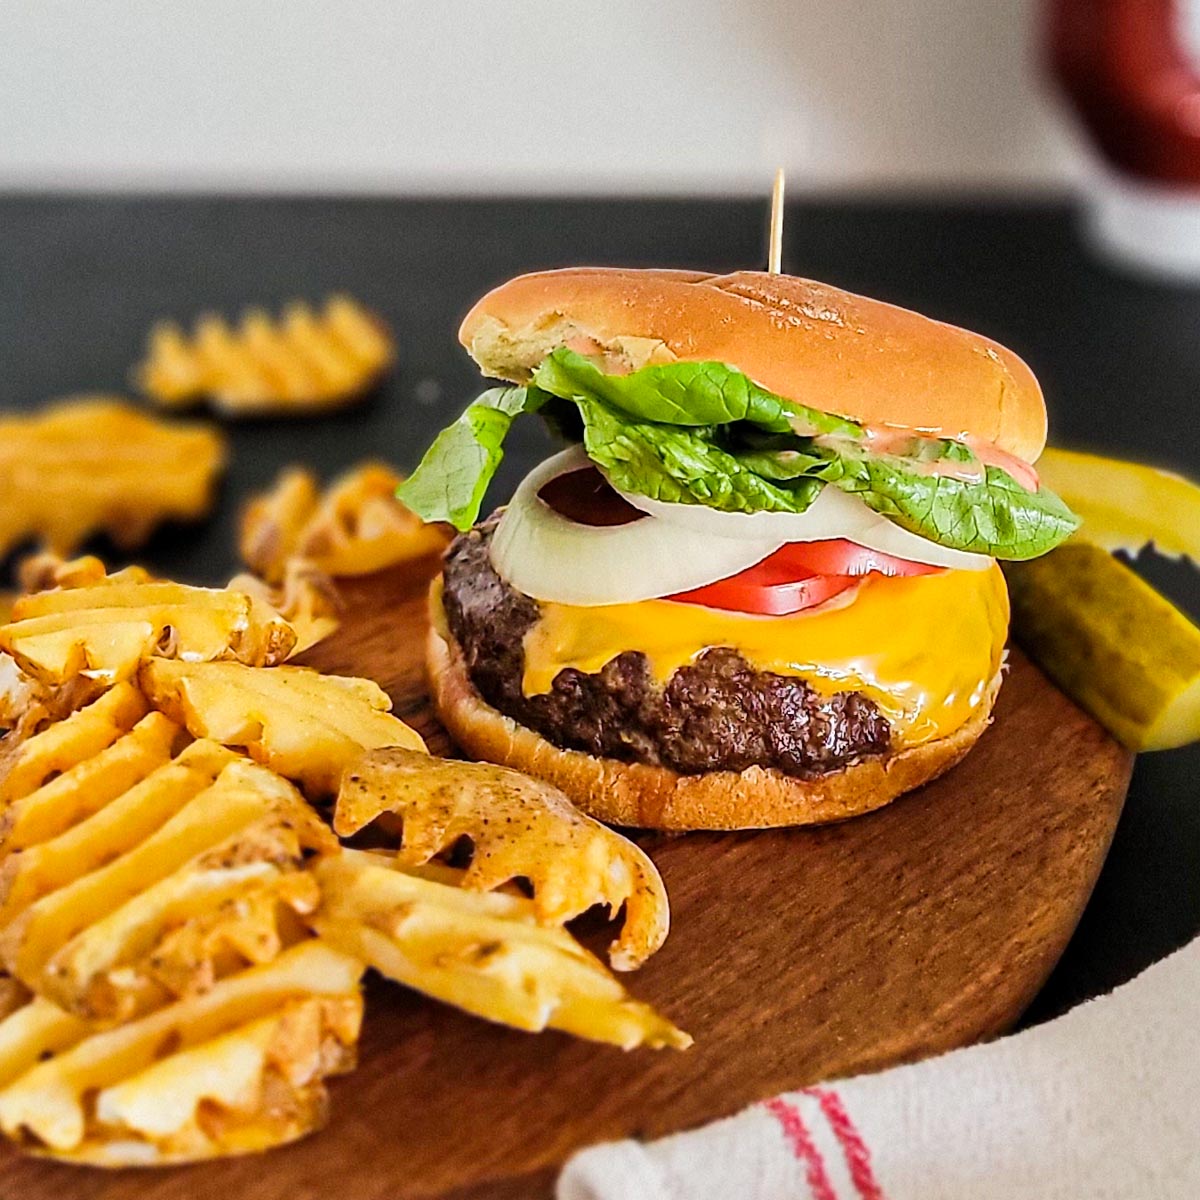 wood platter with a cheeseburger topped with melted cheese, lettuce, tomato, and onion. french fries and pickle spears on side.